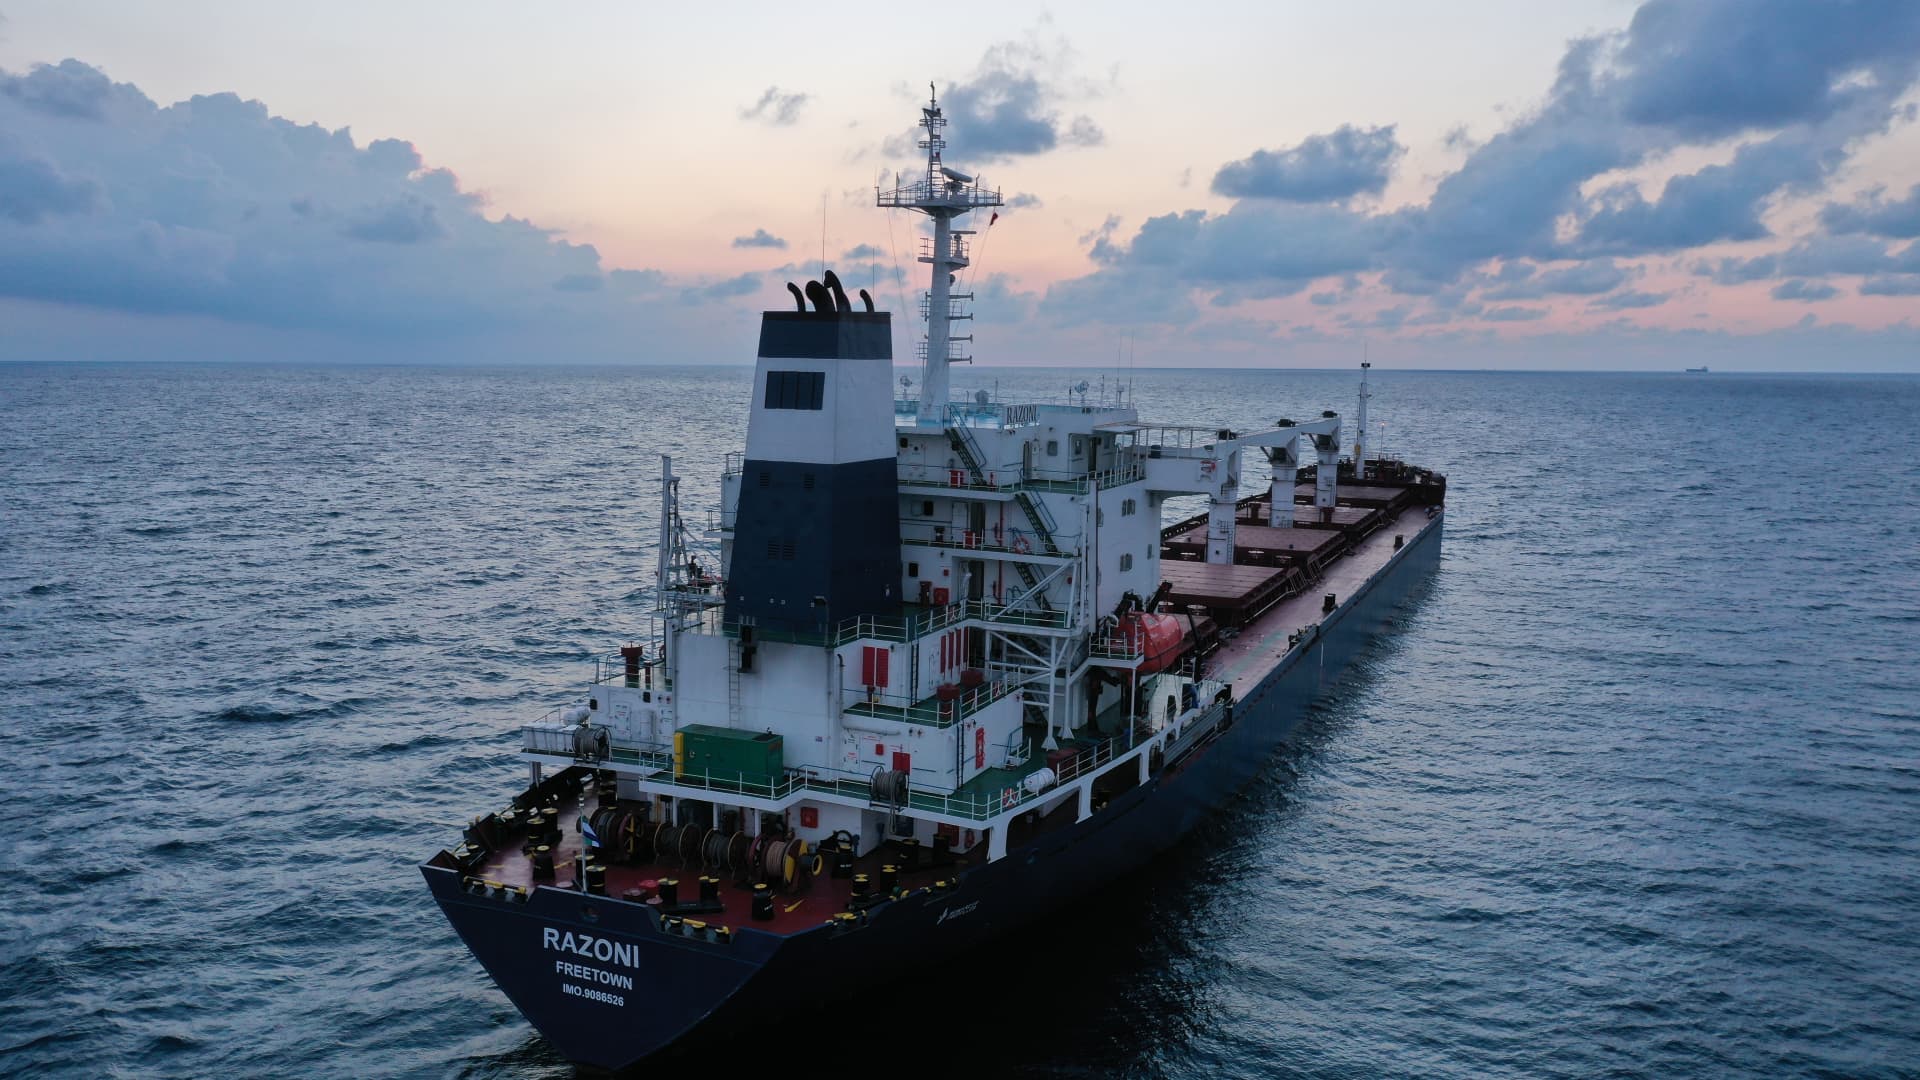 An aerial view of Sierra Leone-flagged dry cargo ship Razoni which departed from the port of Odesa Monday, arriving at the Black Sea entrance of the Bosporus Strait, in Istanbul, Turkey, on August 3, 2022.